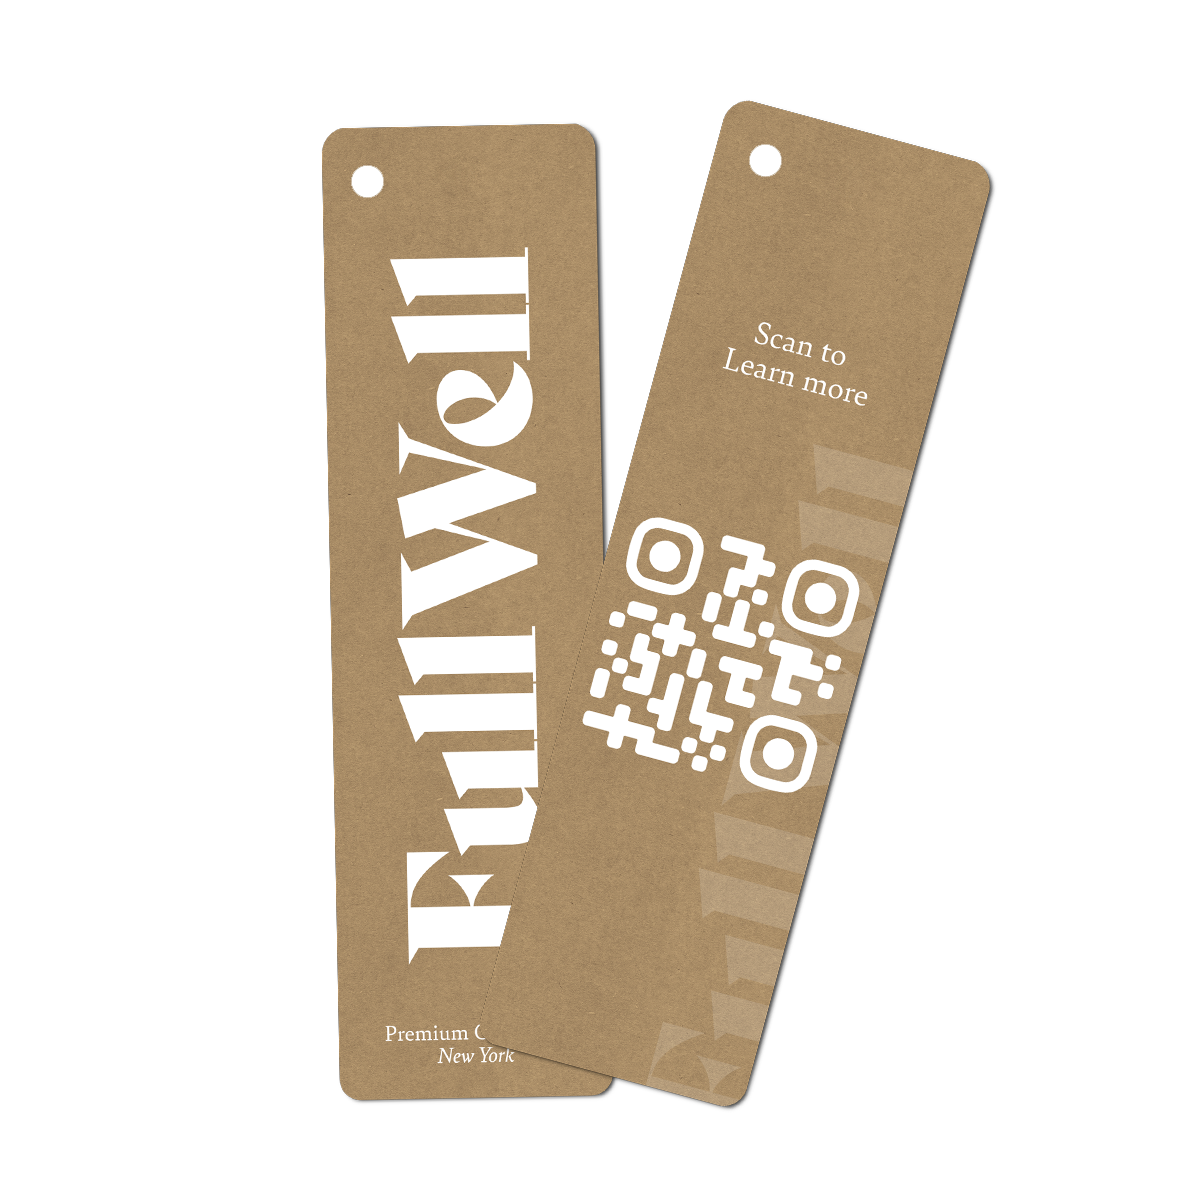 17-creative-ways-to-use-a-qr-code-on-your-packaging